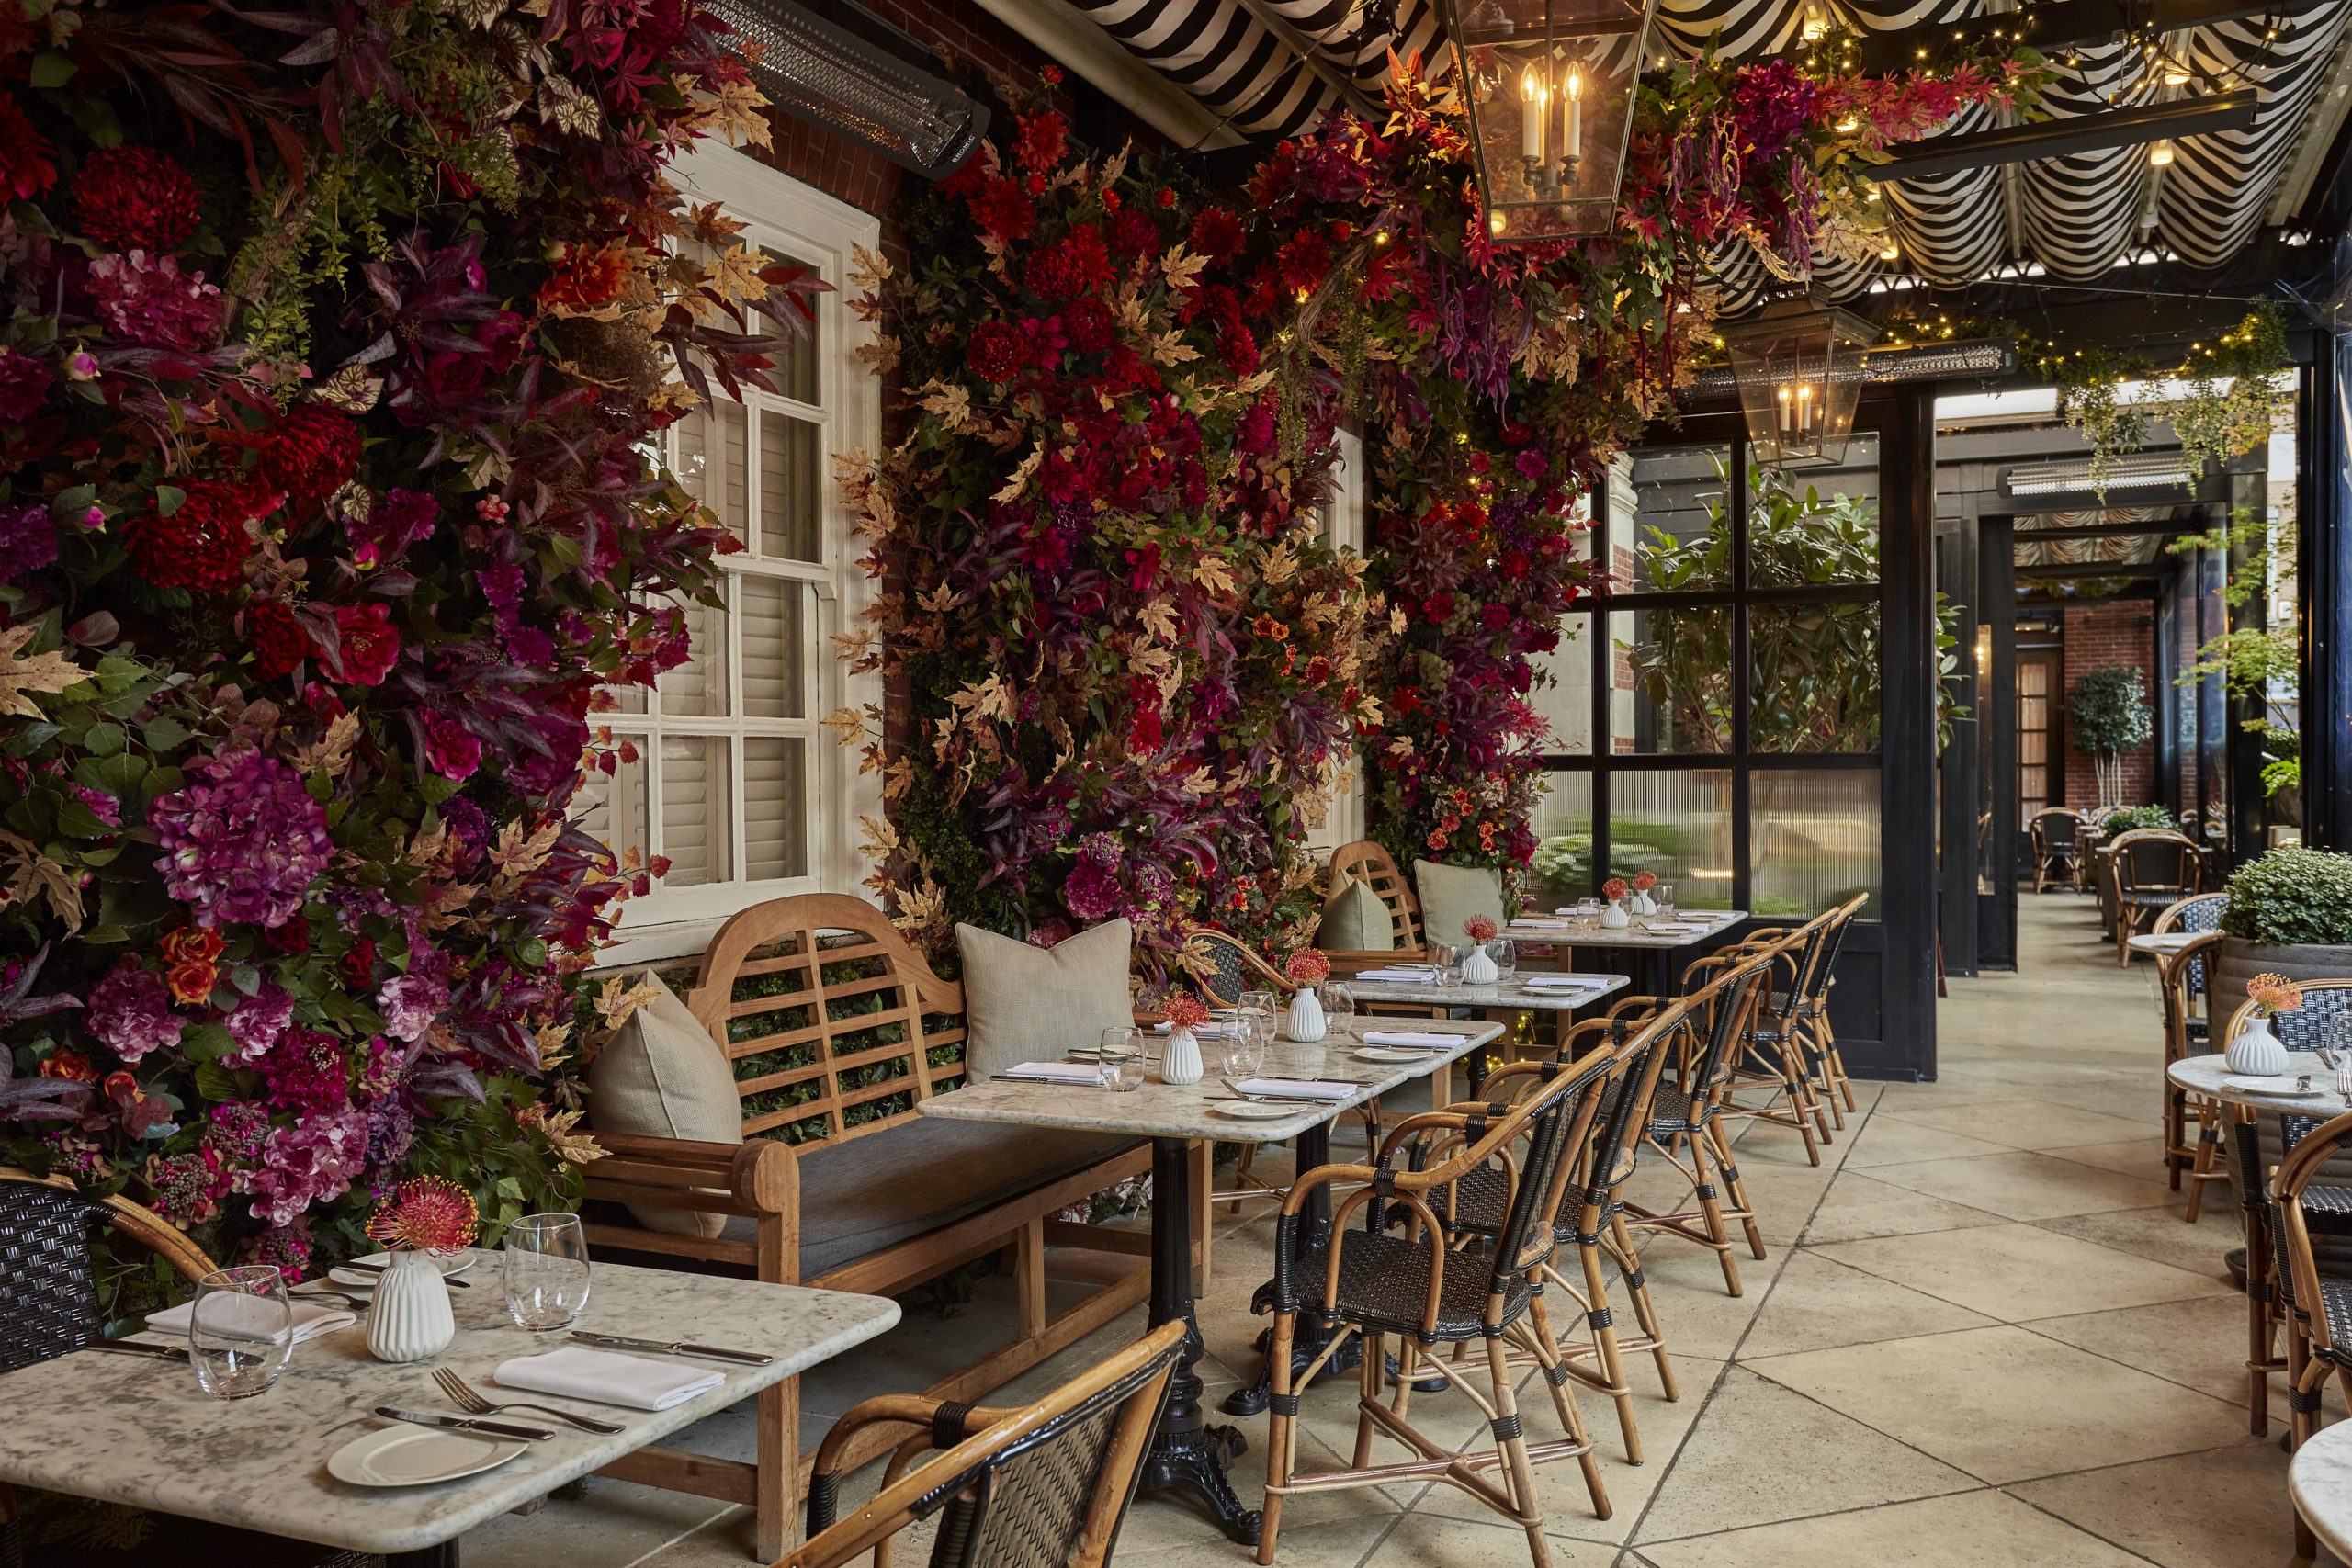 Christmas at Dalloway Terrace, Fitzrovia - seasonal flowers and twinkling lights